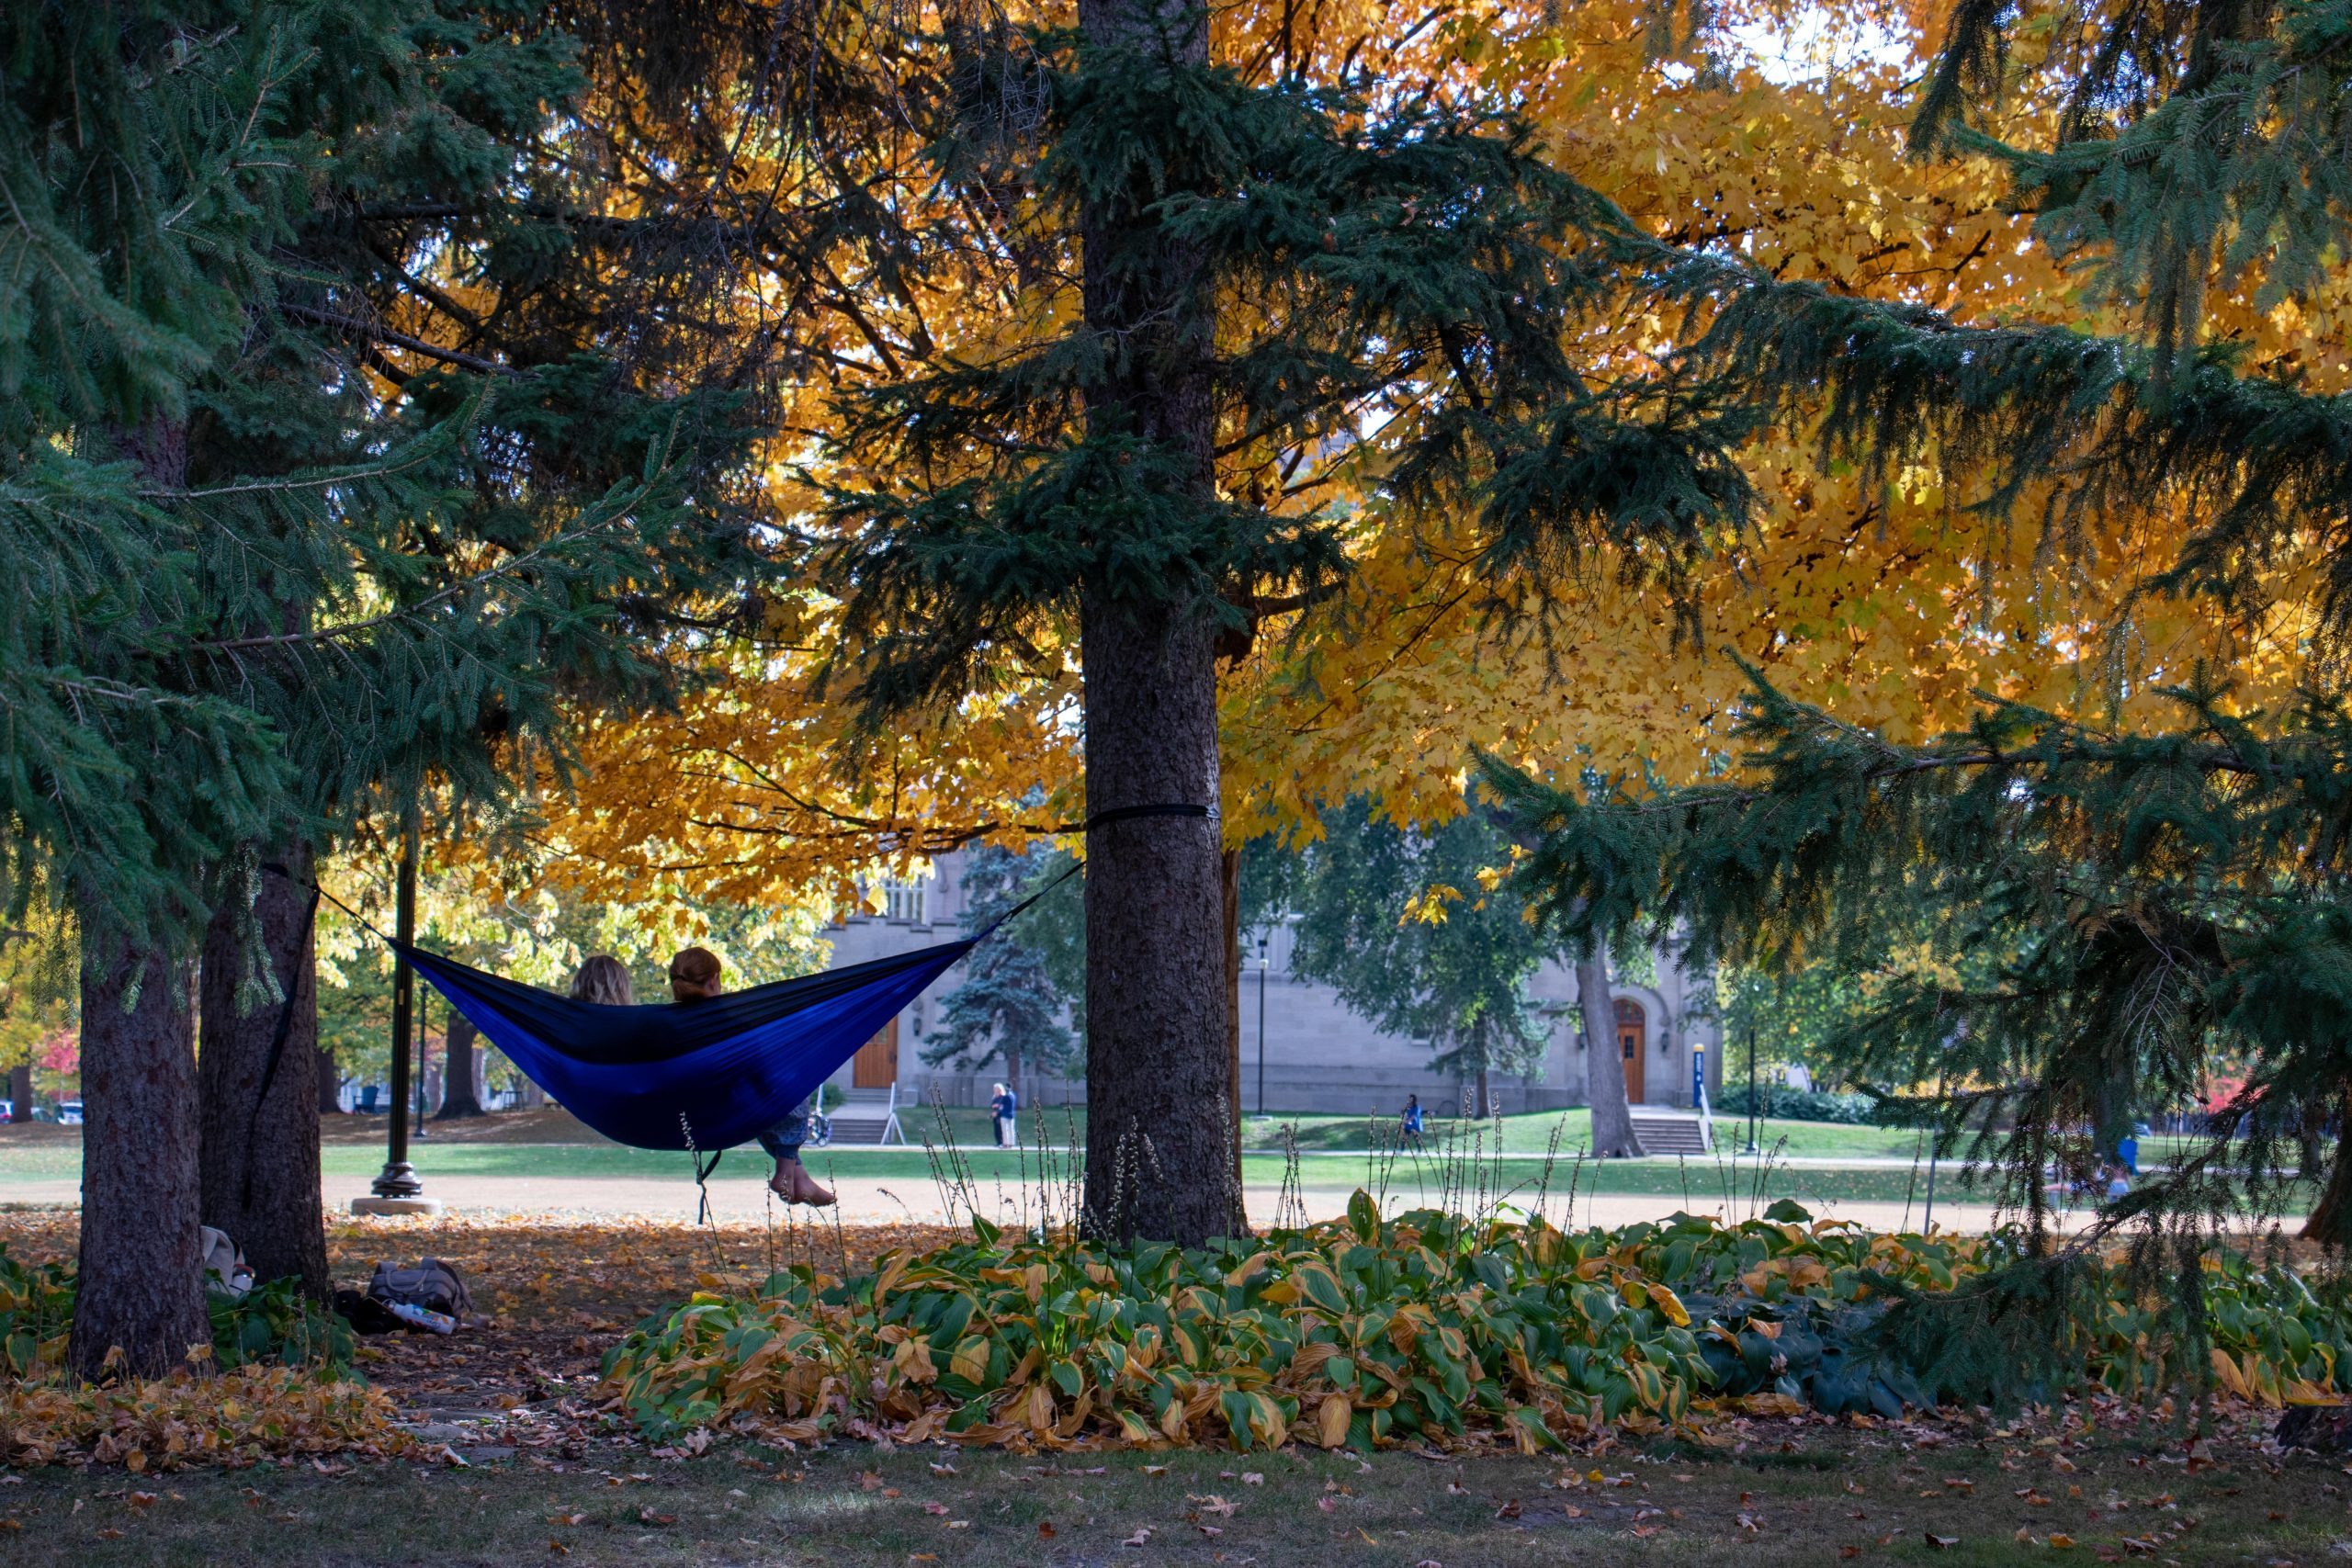 Students on a hammock on the Bald Spot.